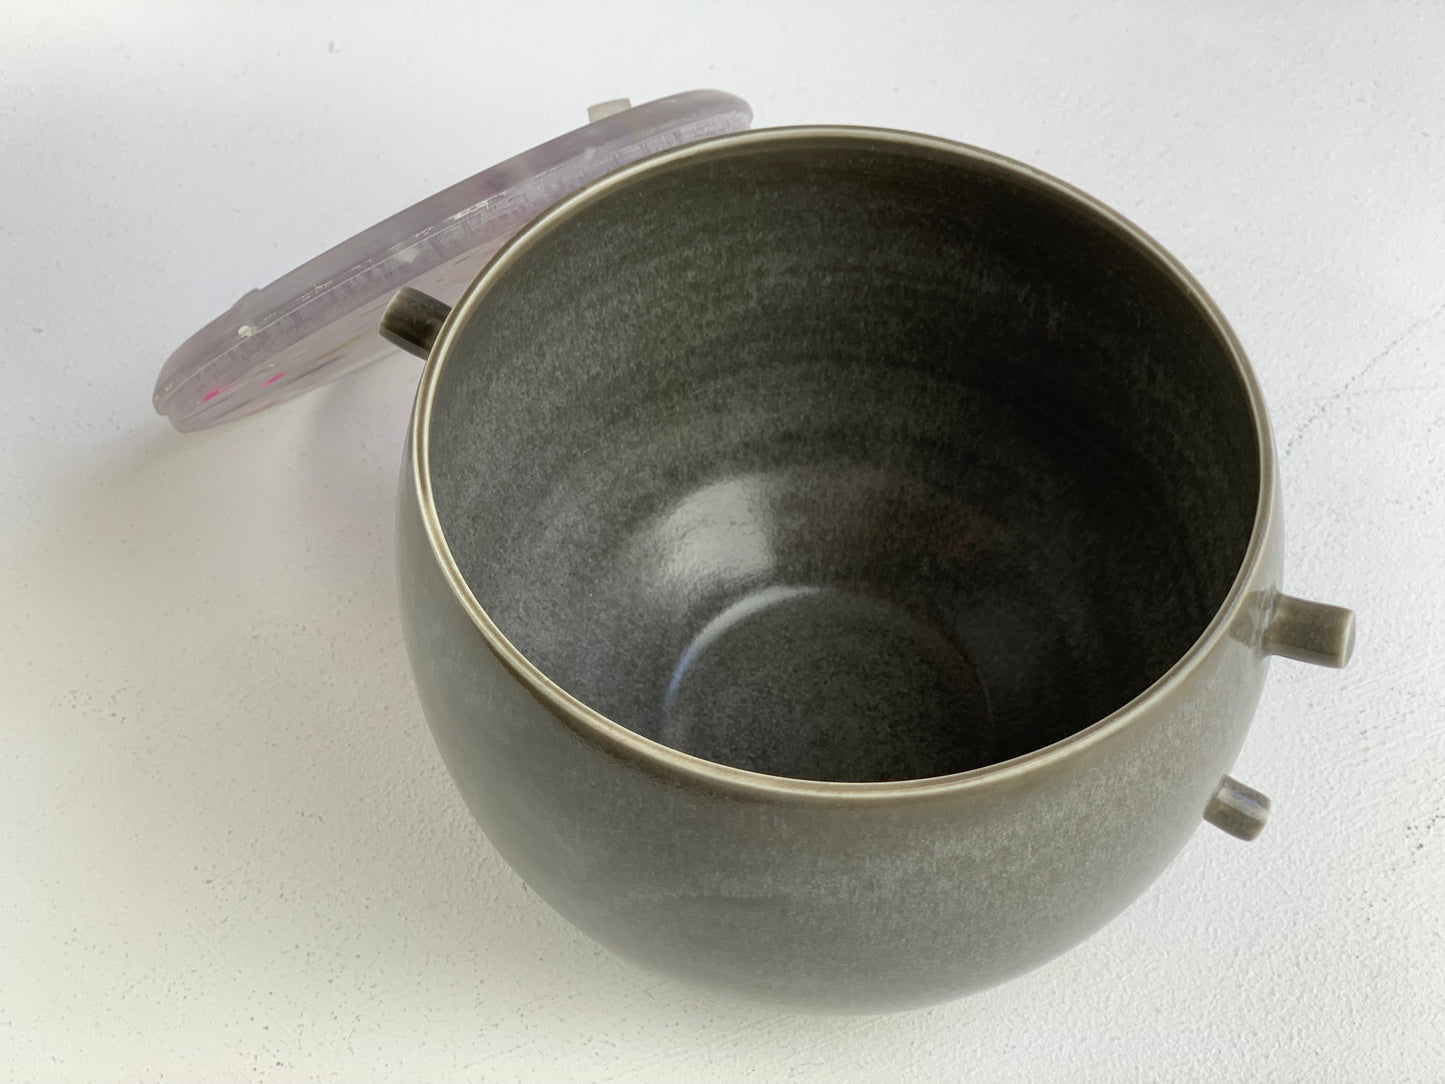 Cook, Steve - Porcelain Vessel with Sustainable Plastic Lid